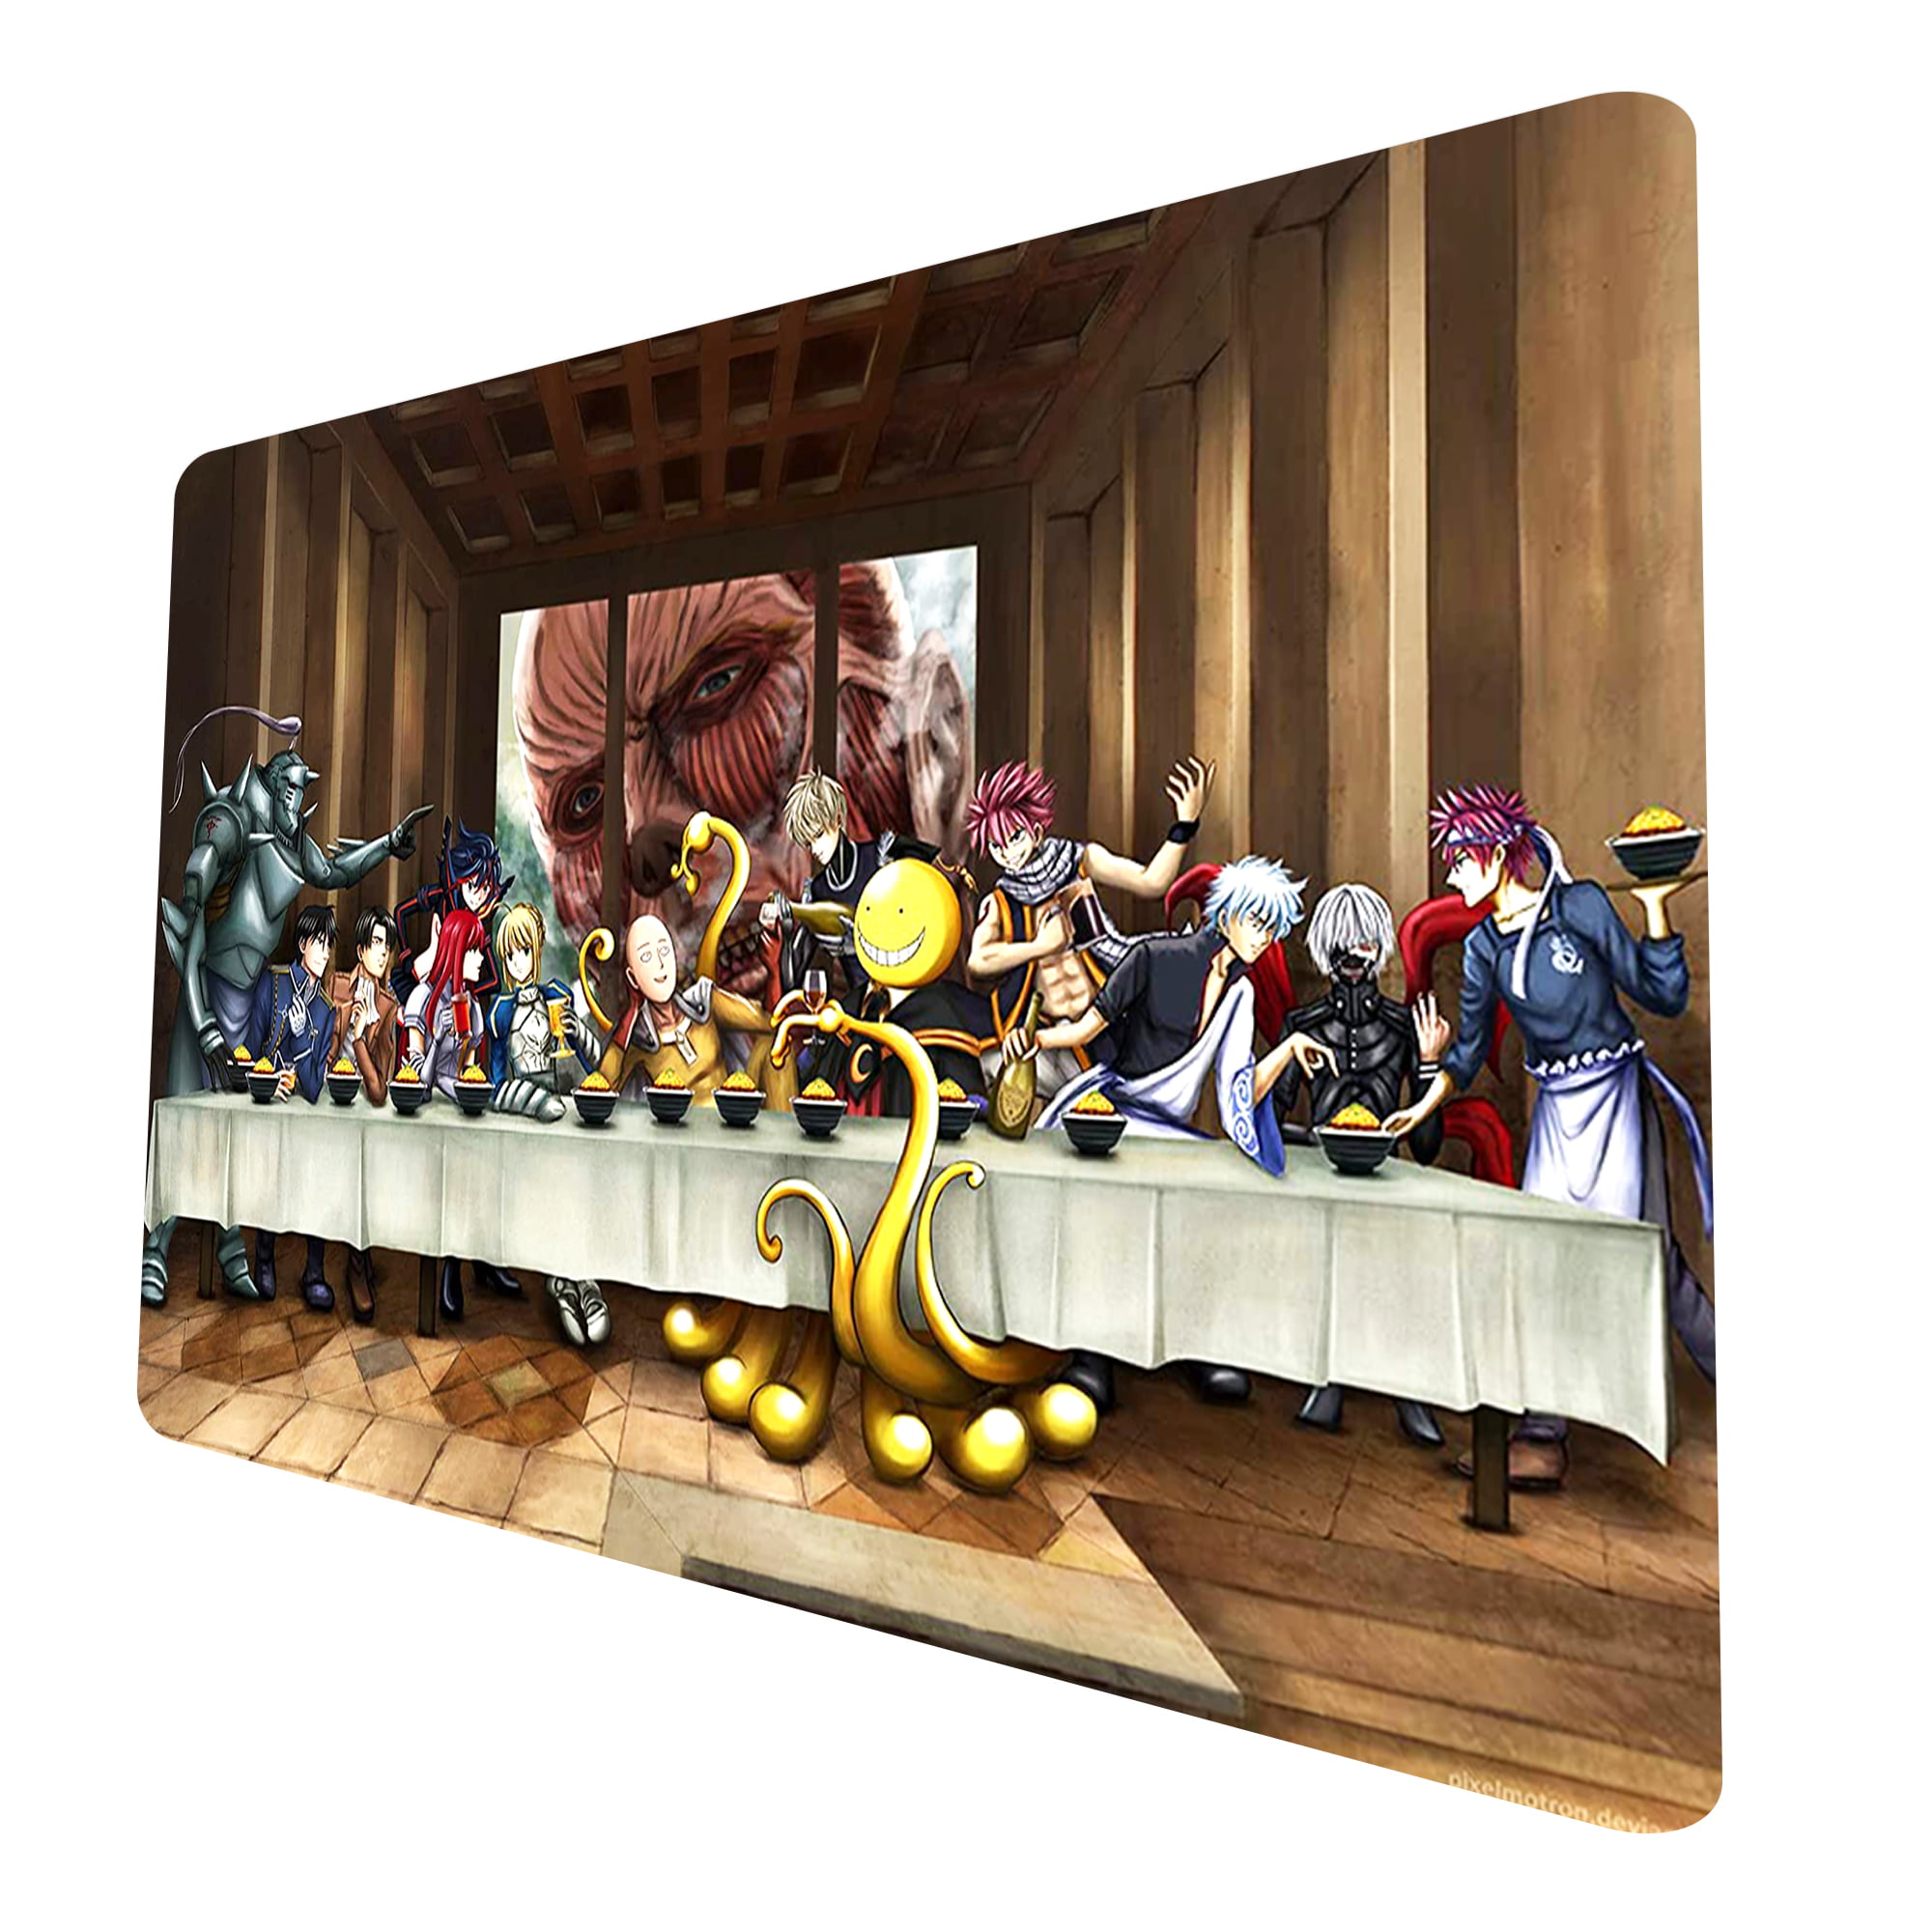 arceus  last supper  picture  games  anime  Pokemon  funny  pictures  best jokes comics images video humor gif animation  i lold